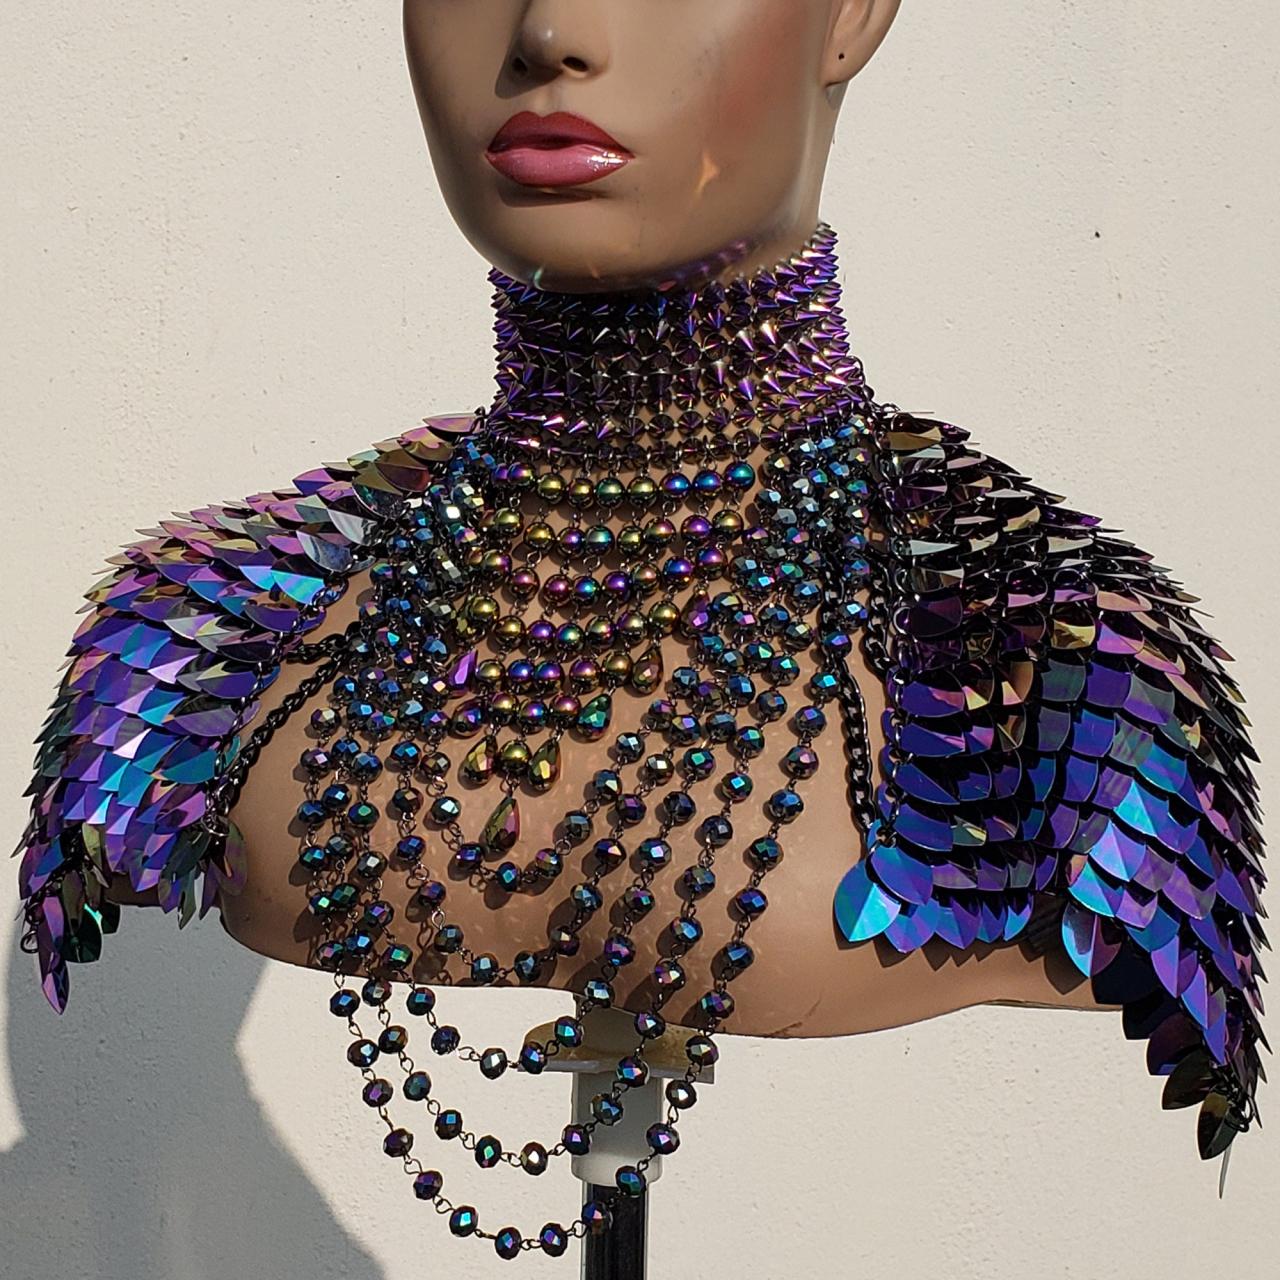 Iridescent Rainbow Scalemail Chainmail Harness Shoulder Pauldrons Pieces Scalemaille Armor Alternative Clothing